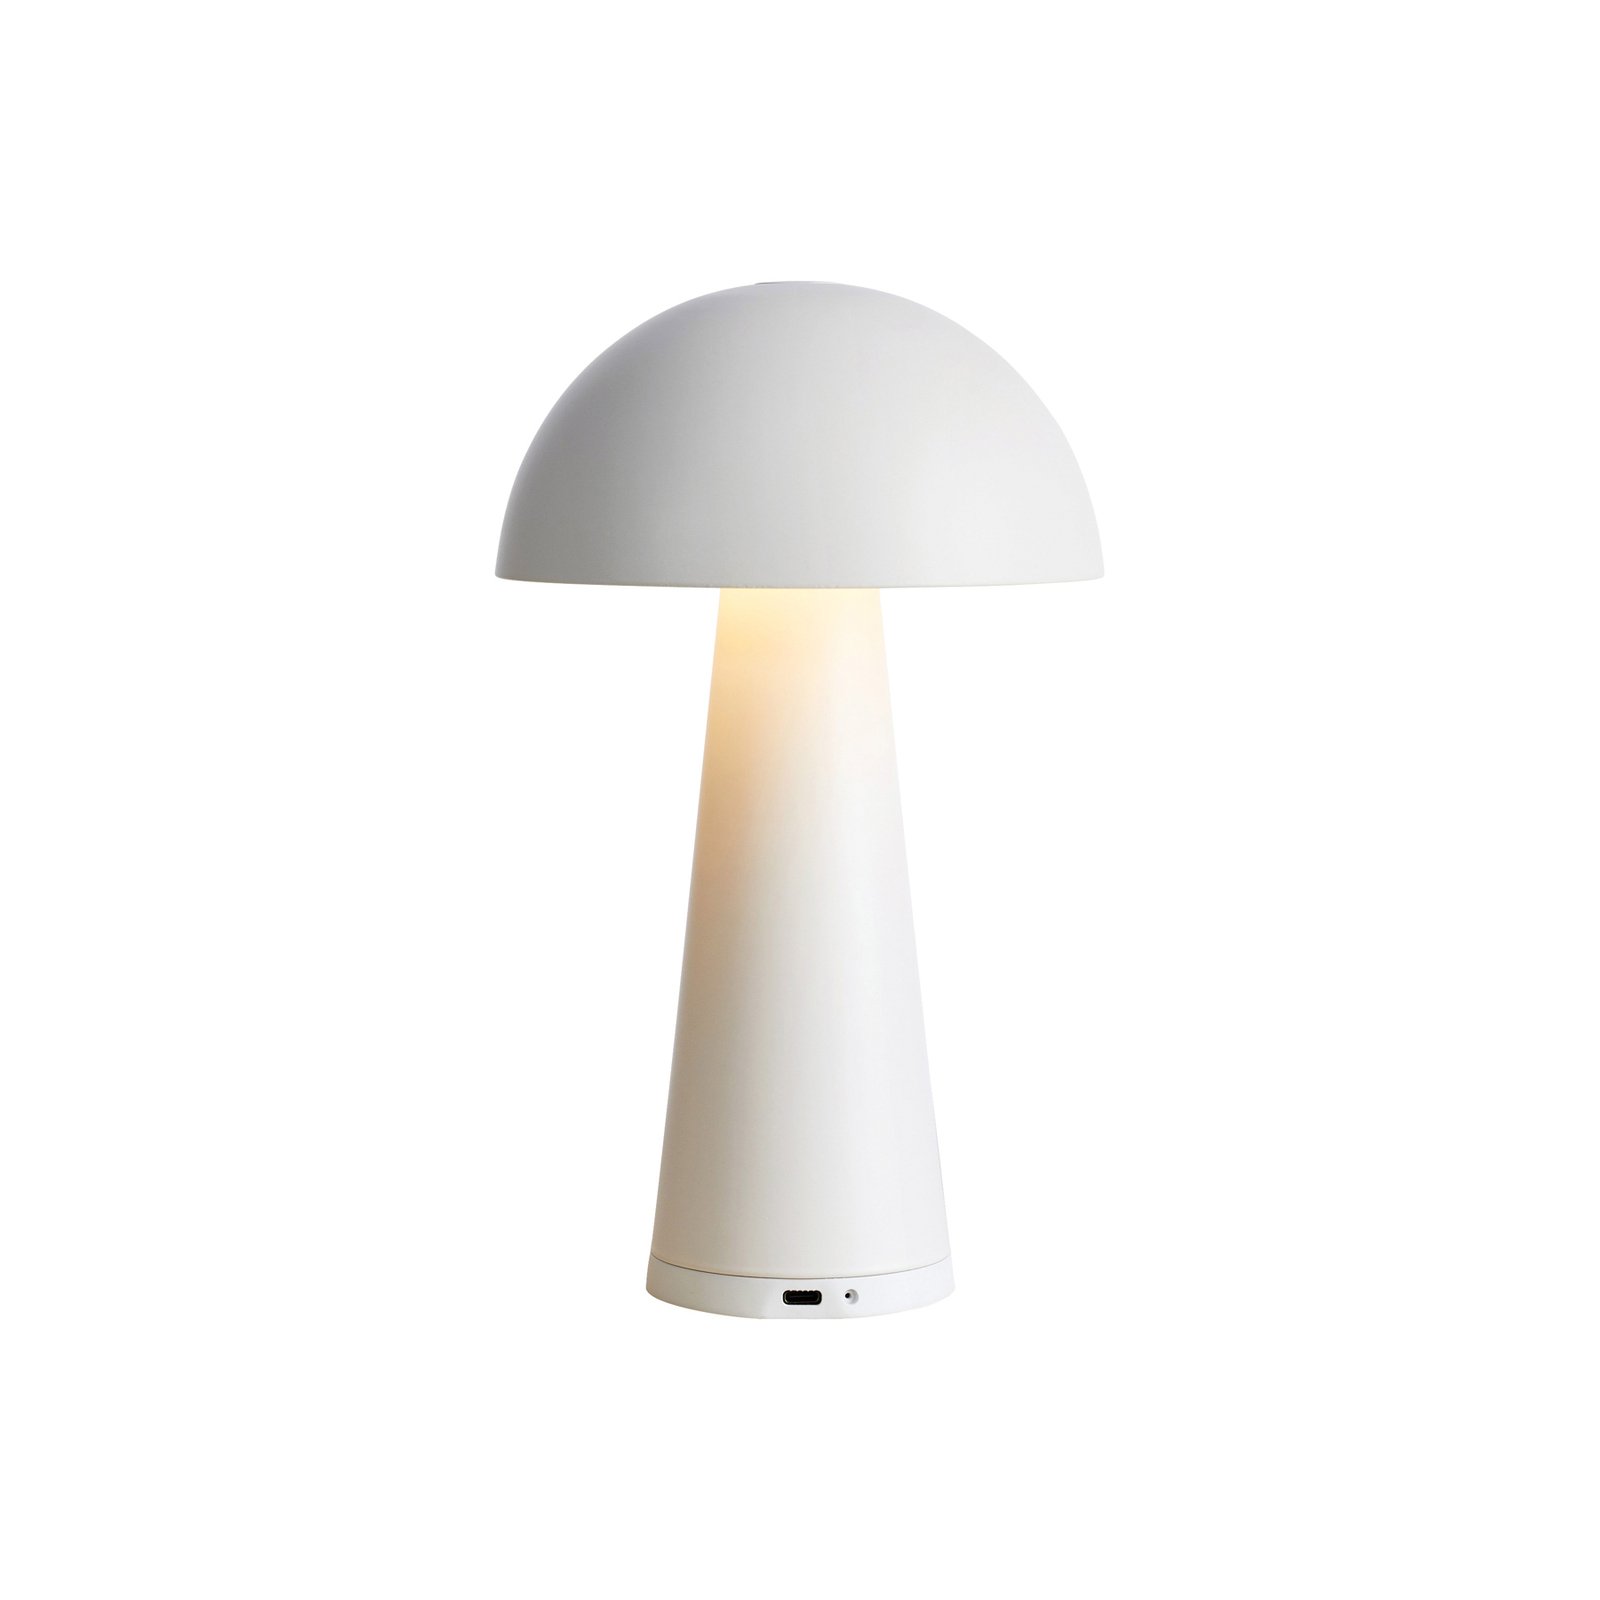 Fungi battery table lamp for outdoors, white